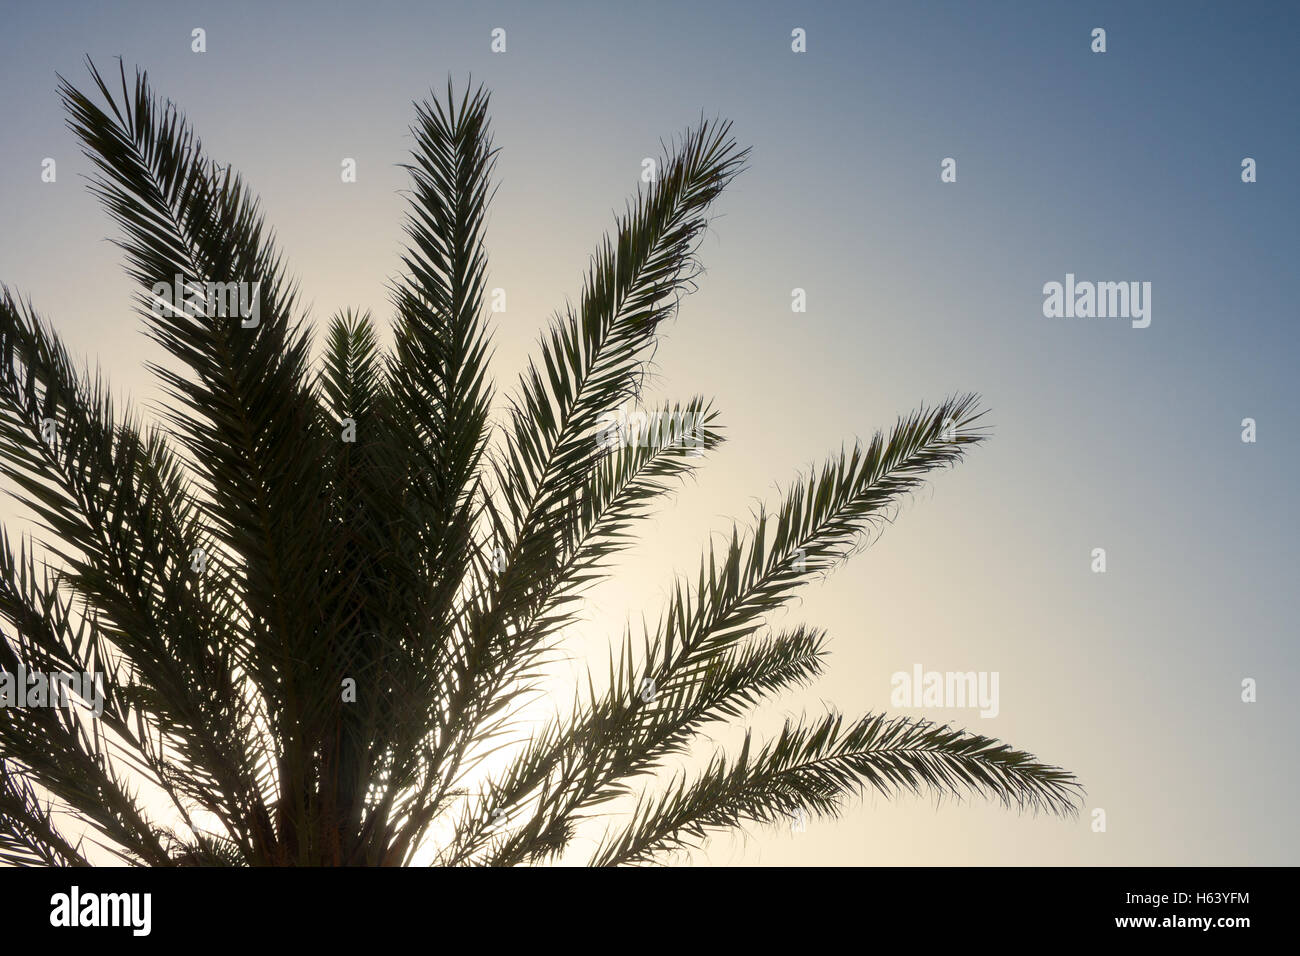 part of palm tree silhouette Stock Photo